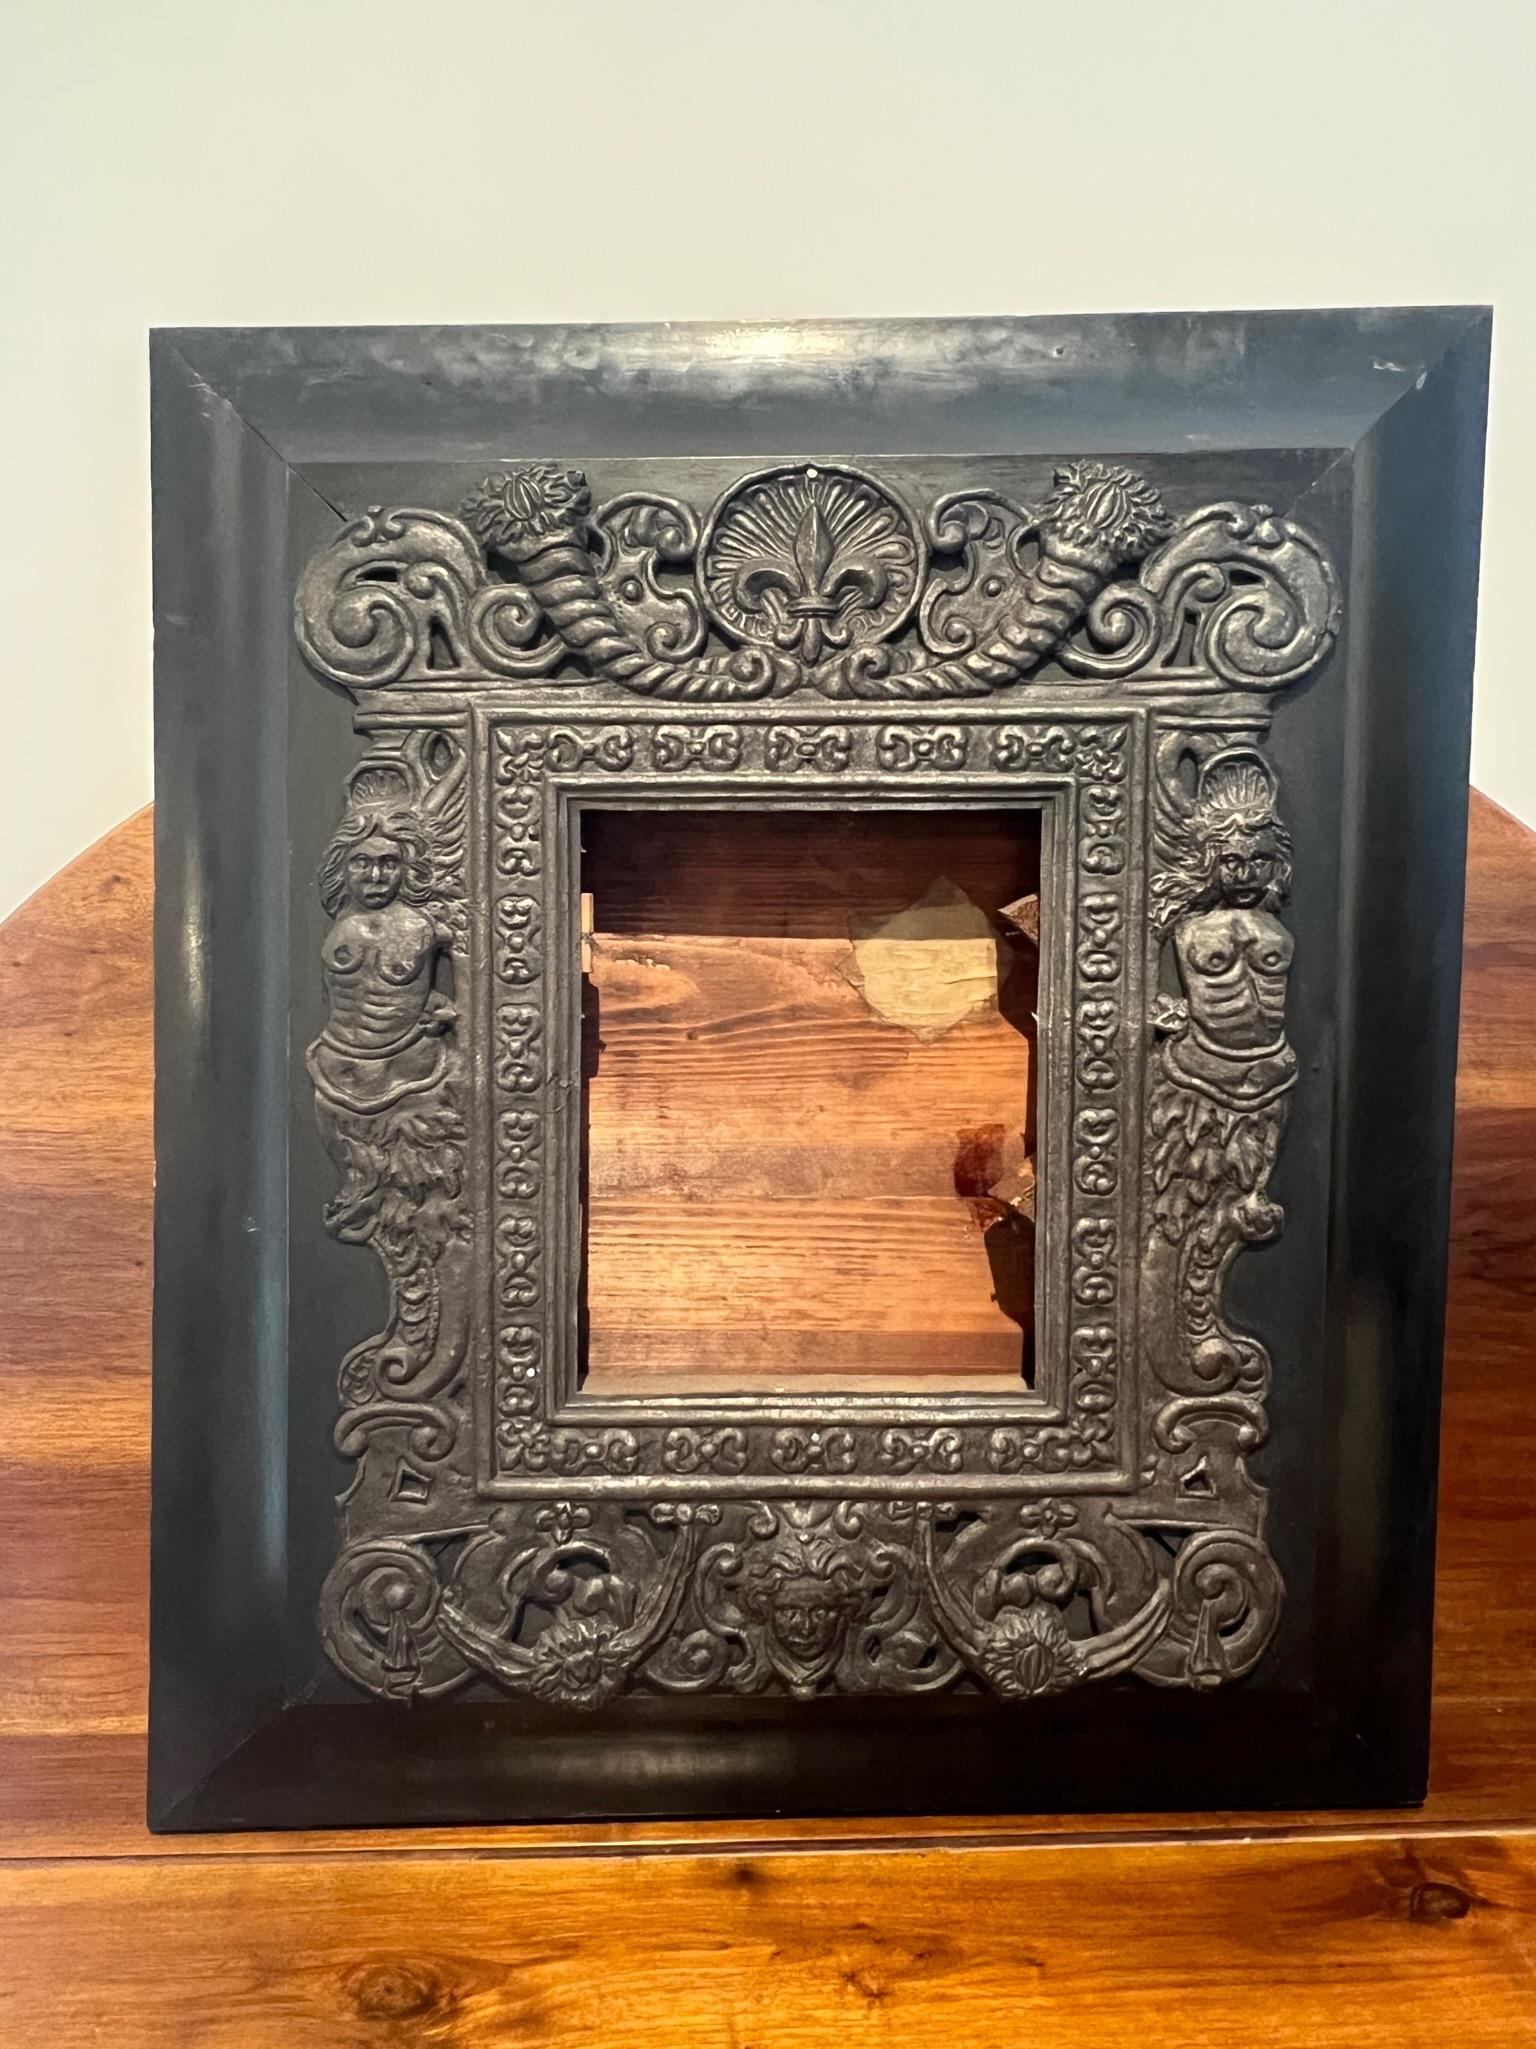 This imposing frame has a large coved wood outer border with an intricately detailed pressed tin or tole overlay. The pressed metal has a lot going on: Fleur de Lis, Cornucopia and topless mermaids. Also, swags, rosettes, flames and shells add to